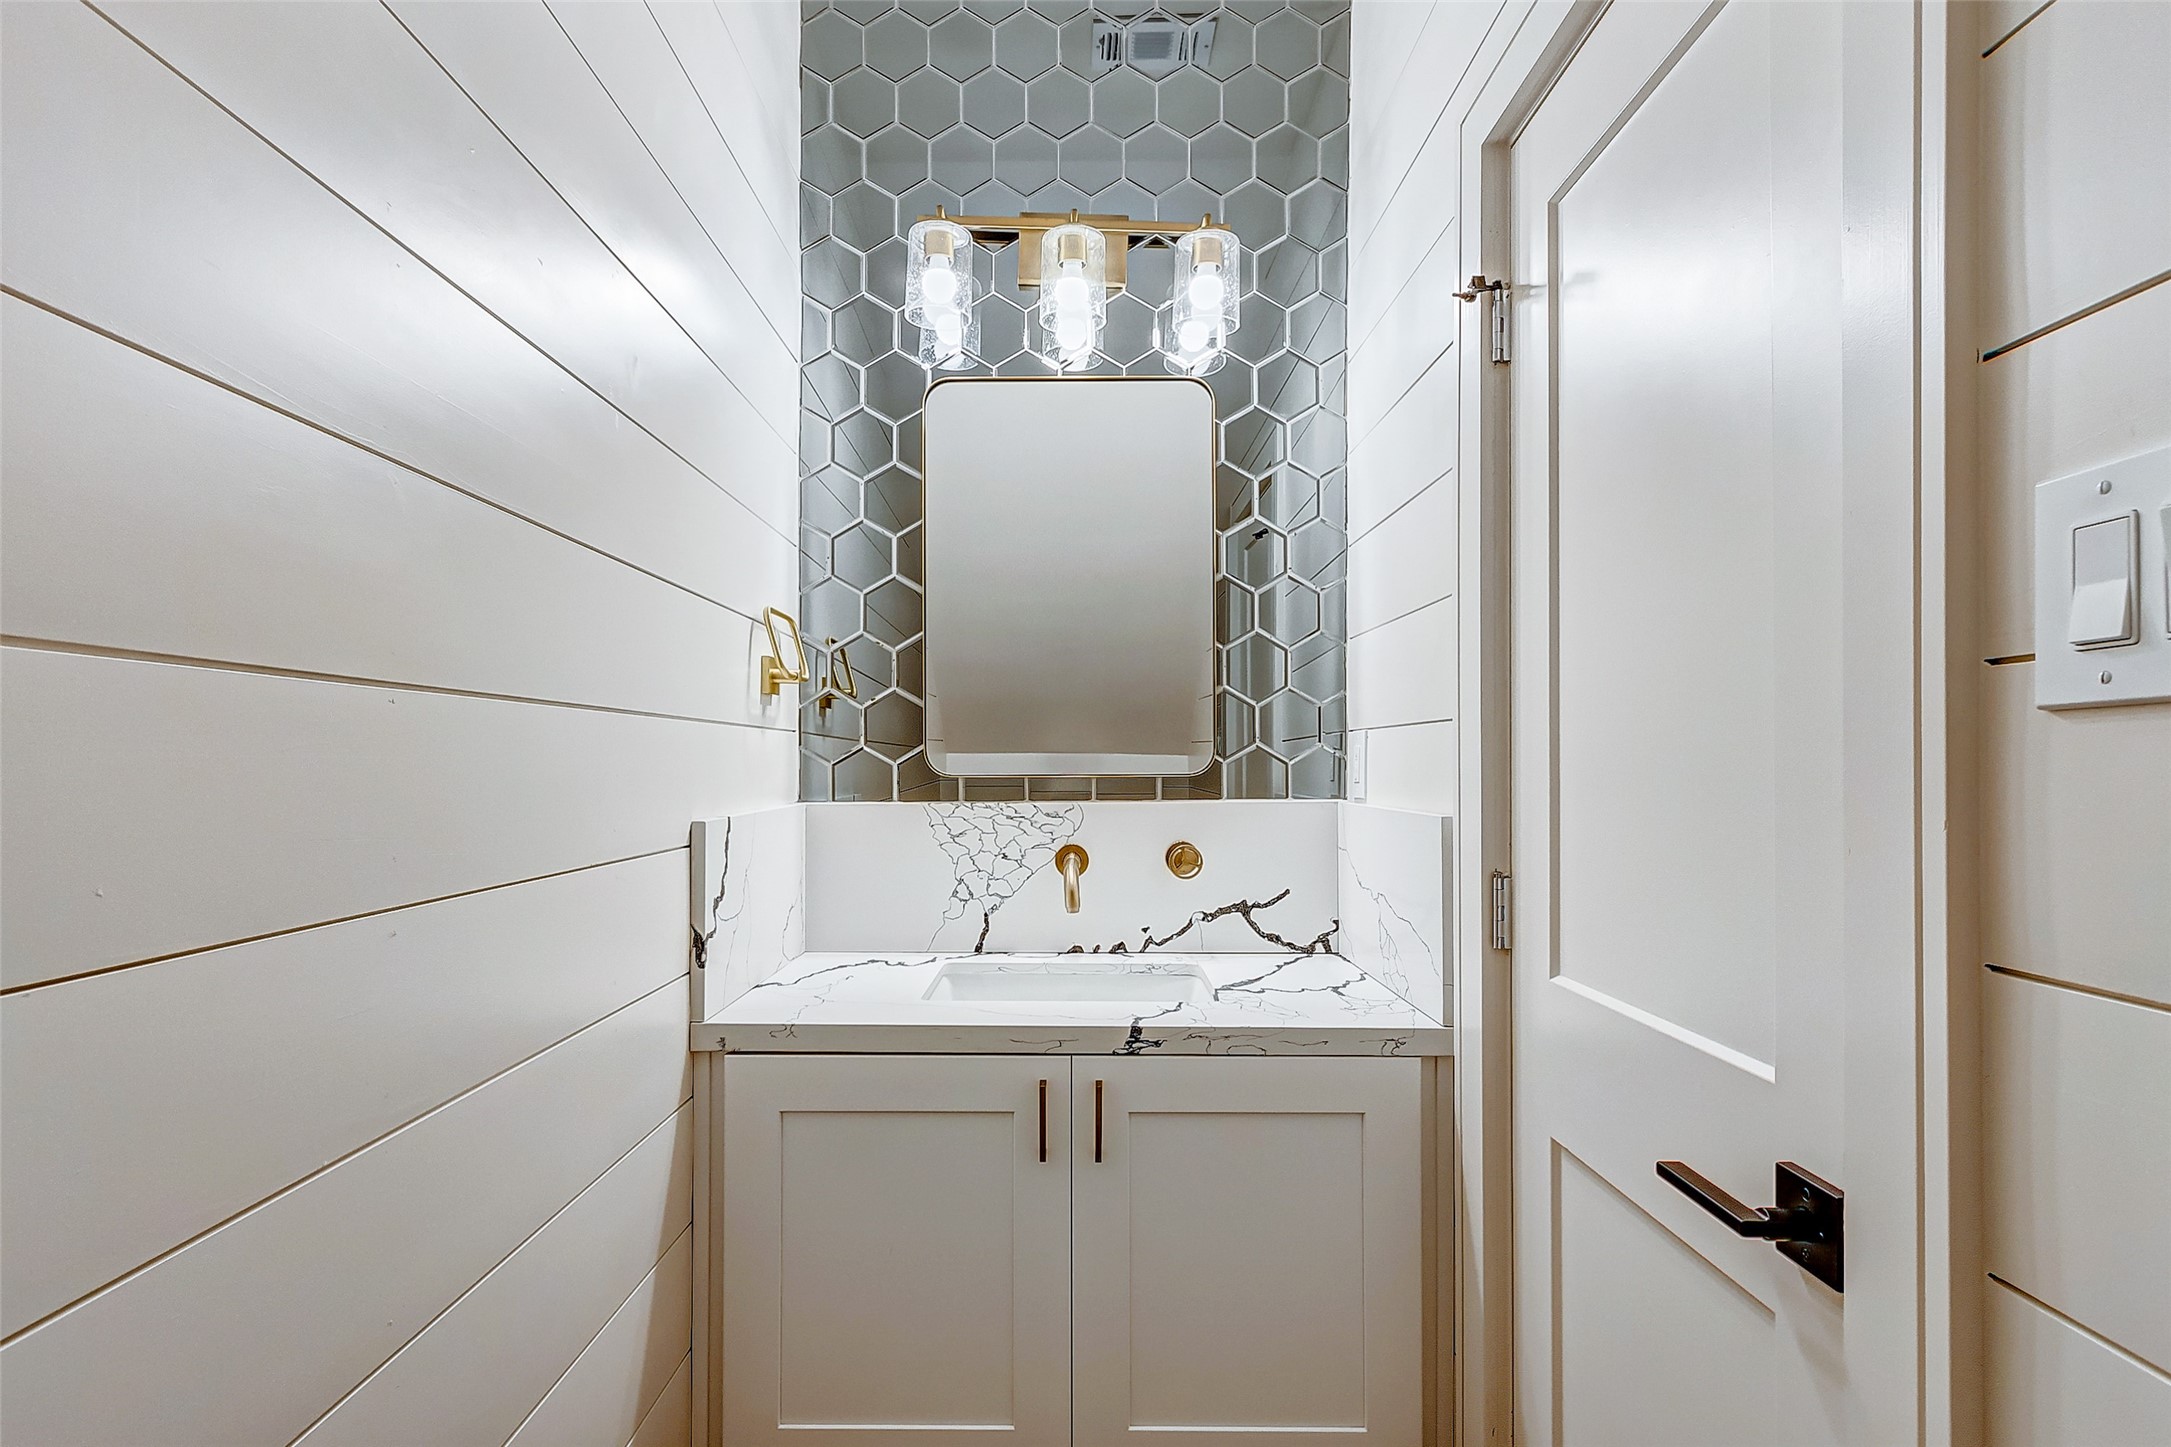 Downstairs you have a half-bathroom, perfect for first floor functionality. Visiting family and friends will appreciate the Quartz counters, mirrored backsplash, gold hardware, stylish framed mirror and luxe vanity lighting!